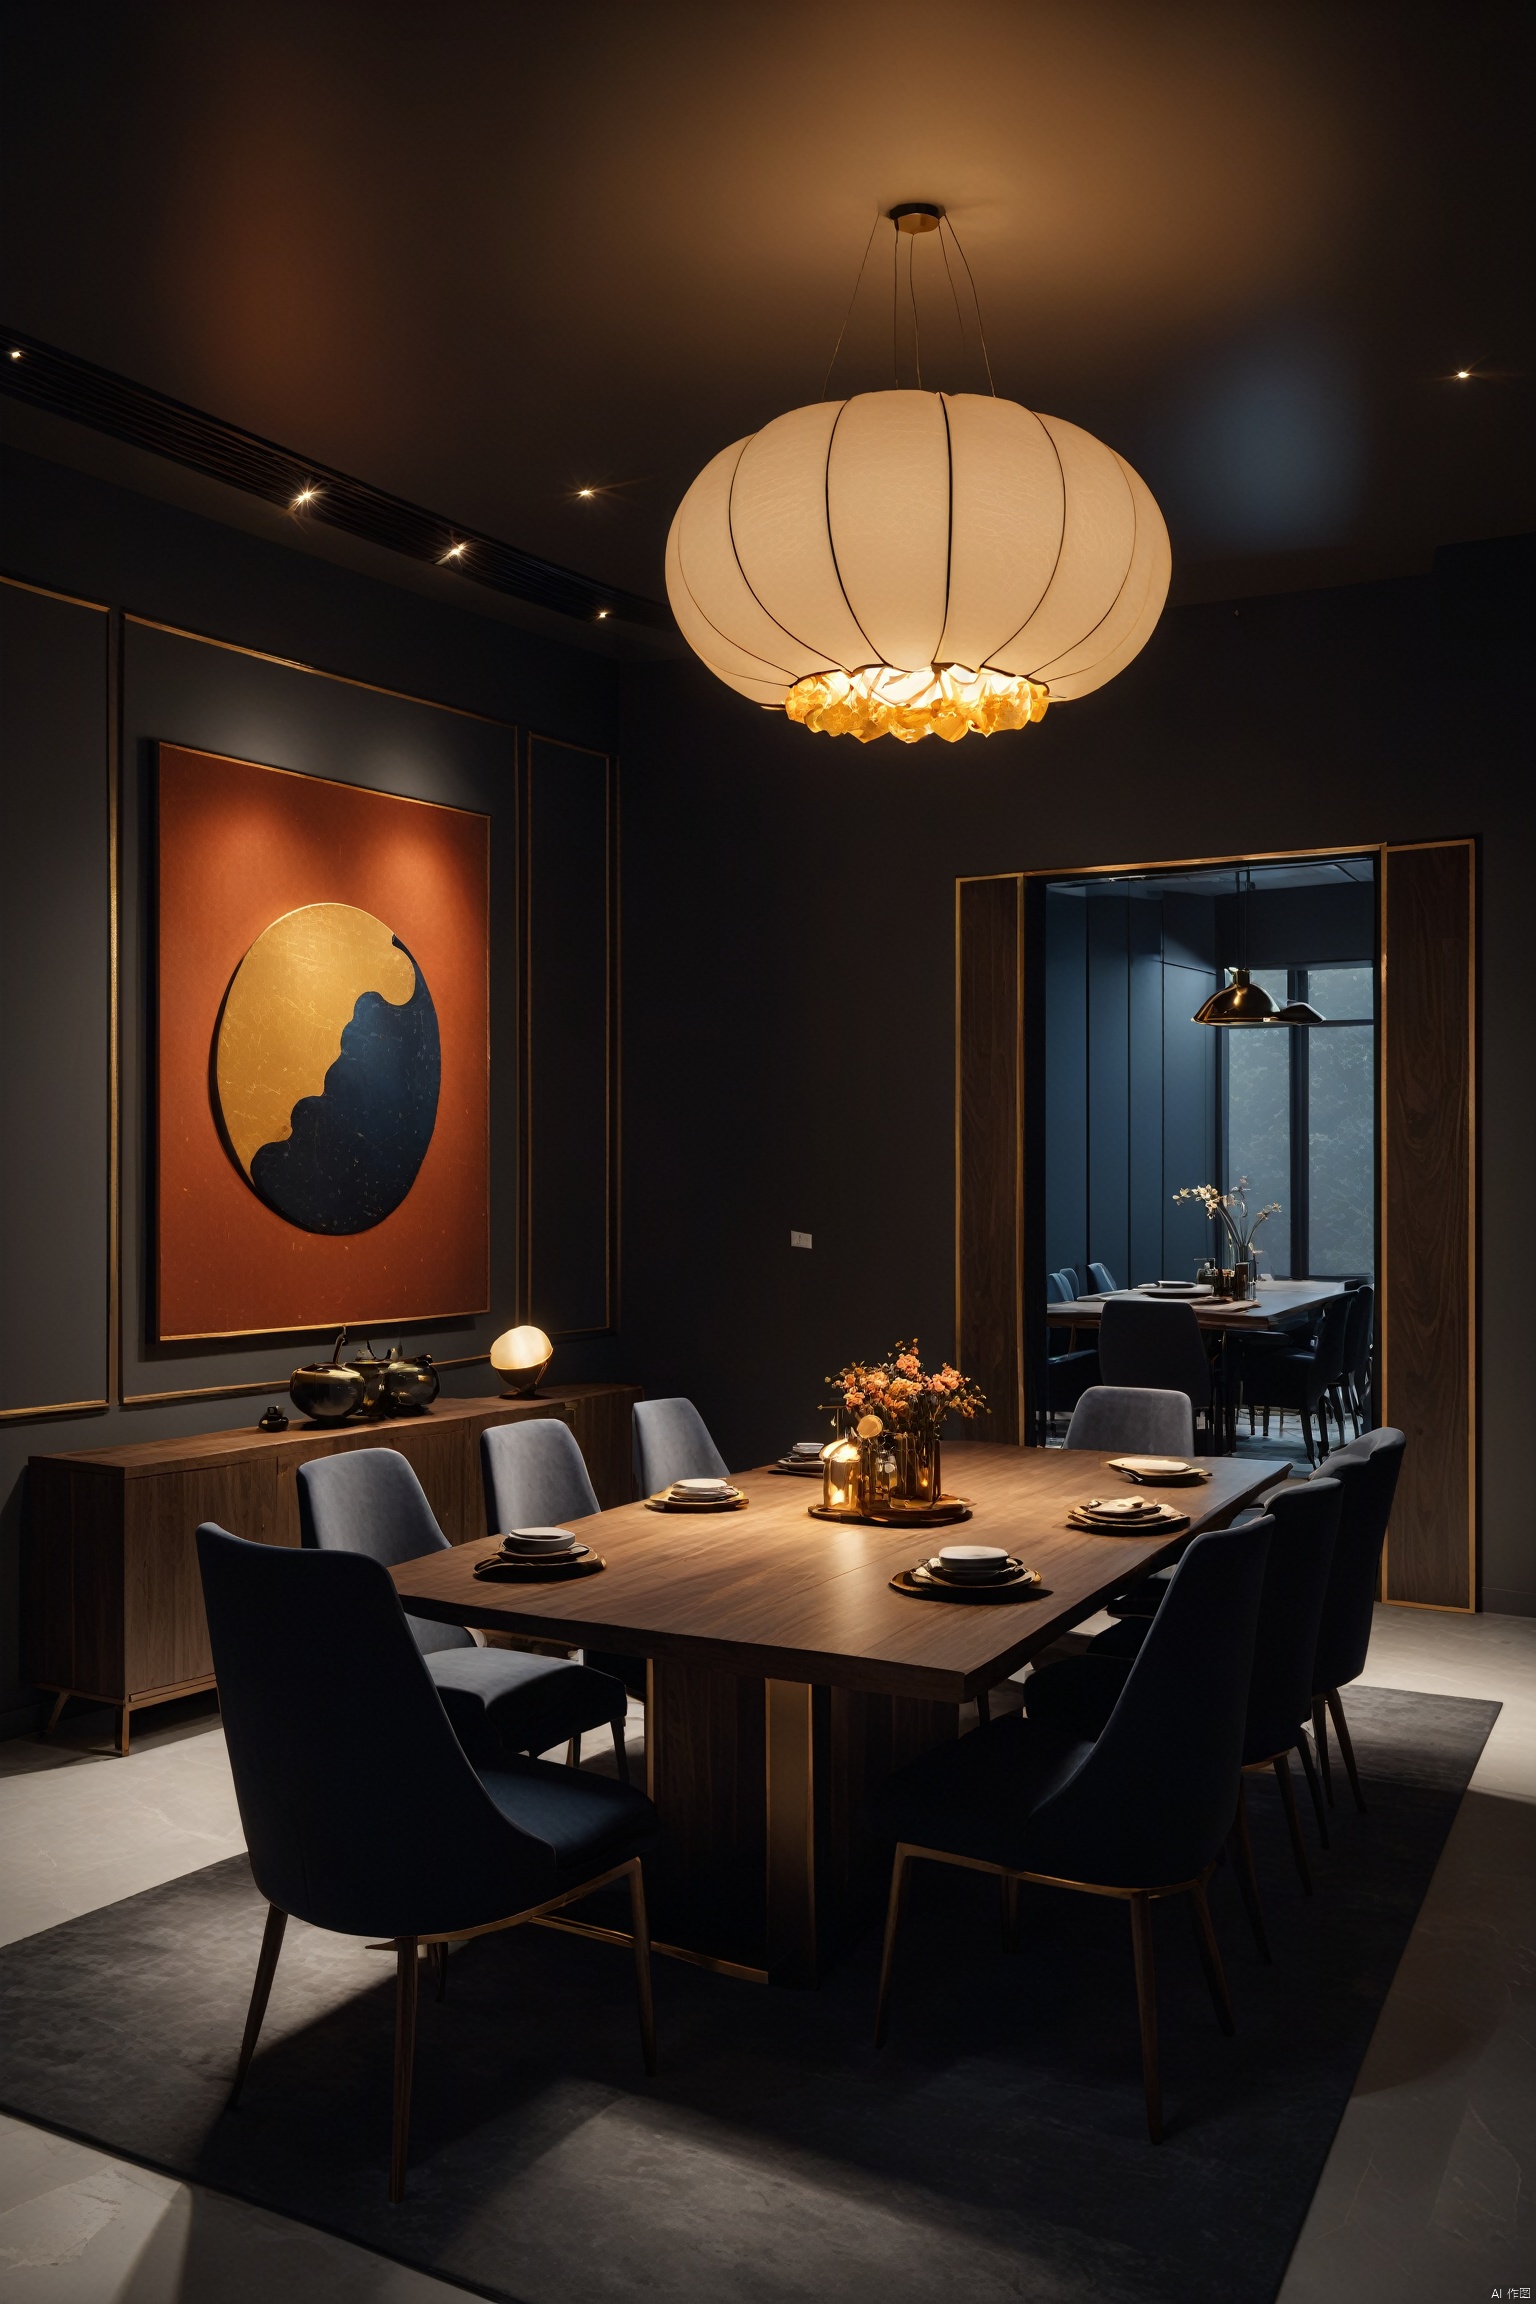 zen,There is a large dining table with chairs and vases on top, key lighting, peugot onyx, vray, beautiful, rendered in Lumion Pro, Corona renderer, vray lighting, ultra realistic rendering, avant-garde lighting, dark concrete room, 8k, Unreal Engine 5, 4k rendering, volume lighting - h 7 6 8, dark exhibition hall, 3dsmax+vray, surrealist lighting studio, edge lighting, 16k, octane rendering, Pinterest, Warm lighting inside, modern lighting,high detail,extremely detailed, best quality, masterpiece, high resolution, Photorealism, Hyperrealistic, Realistic, 8Kcorona render, octane render, 3ds maxzen<lora:EMS-317795-EMS:0.800000>